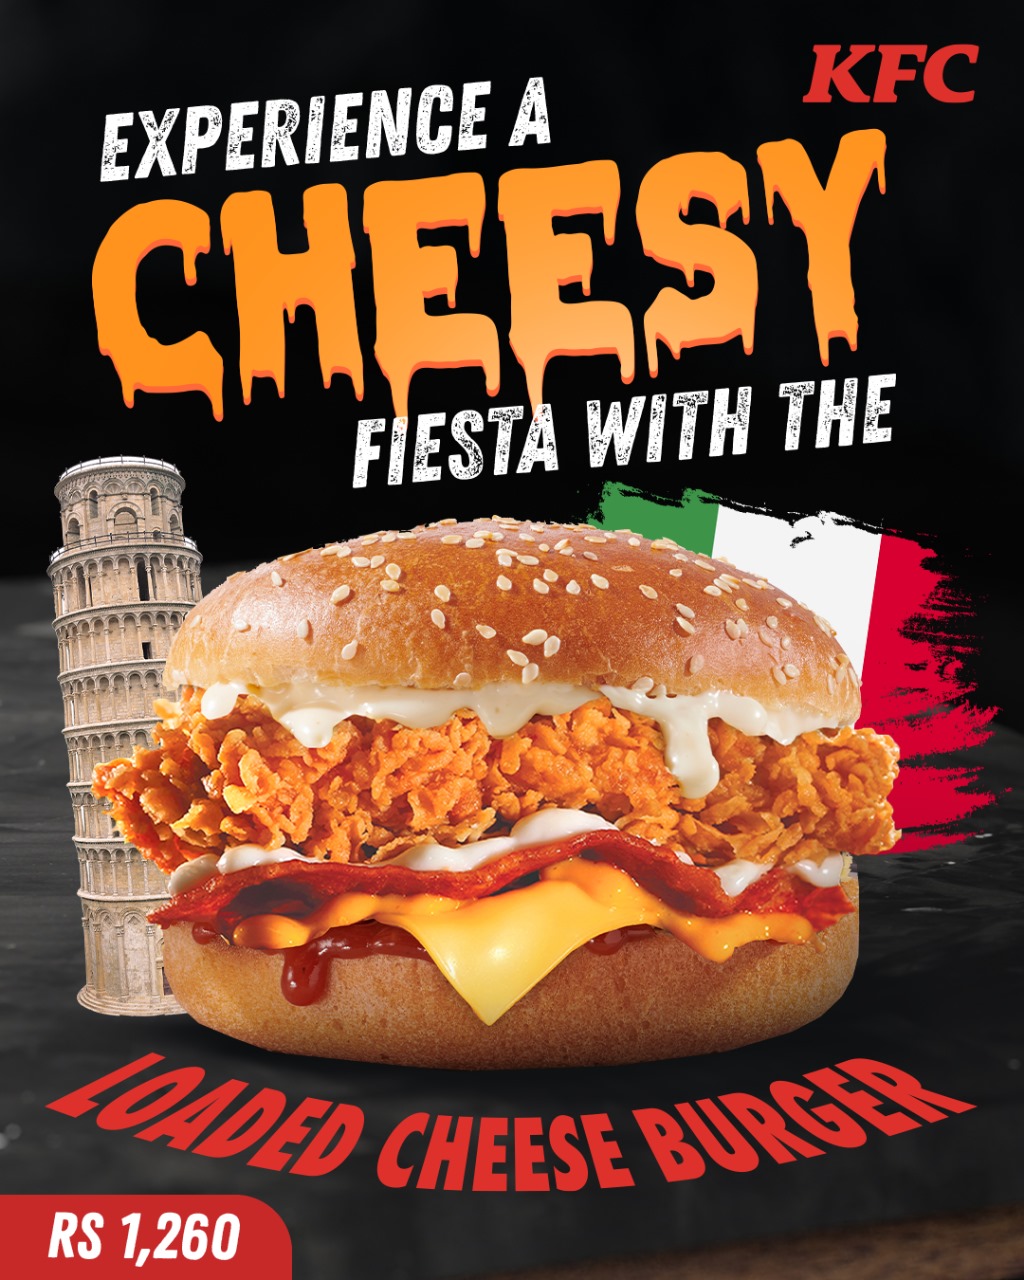 LOADED CHEESE BURGER